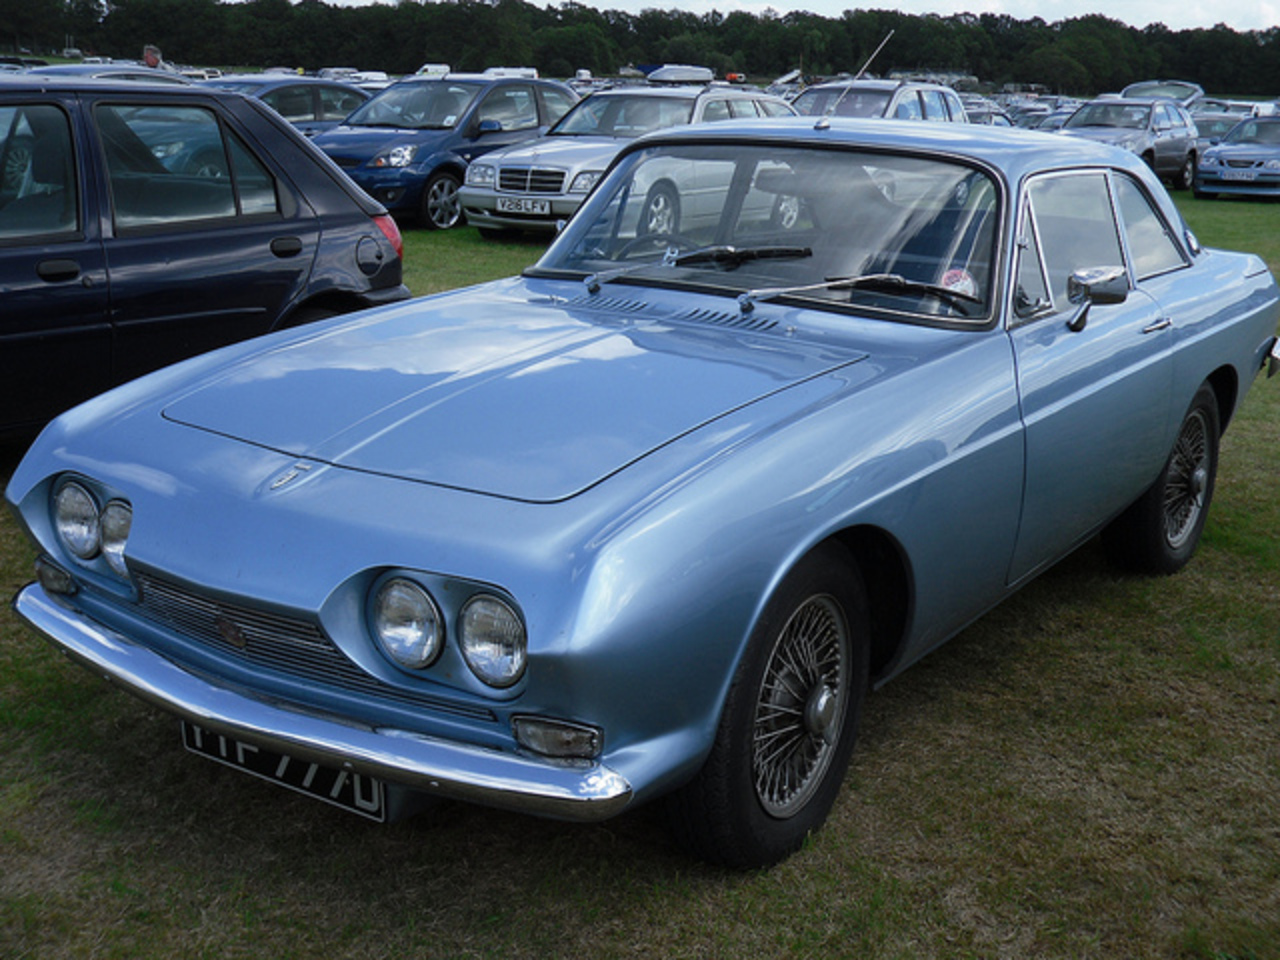 1966 Reliant Scimitar SE4 2.6 Coupe. | Flickr - Photo Sharing!